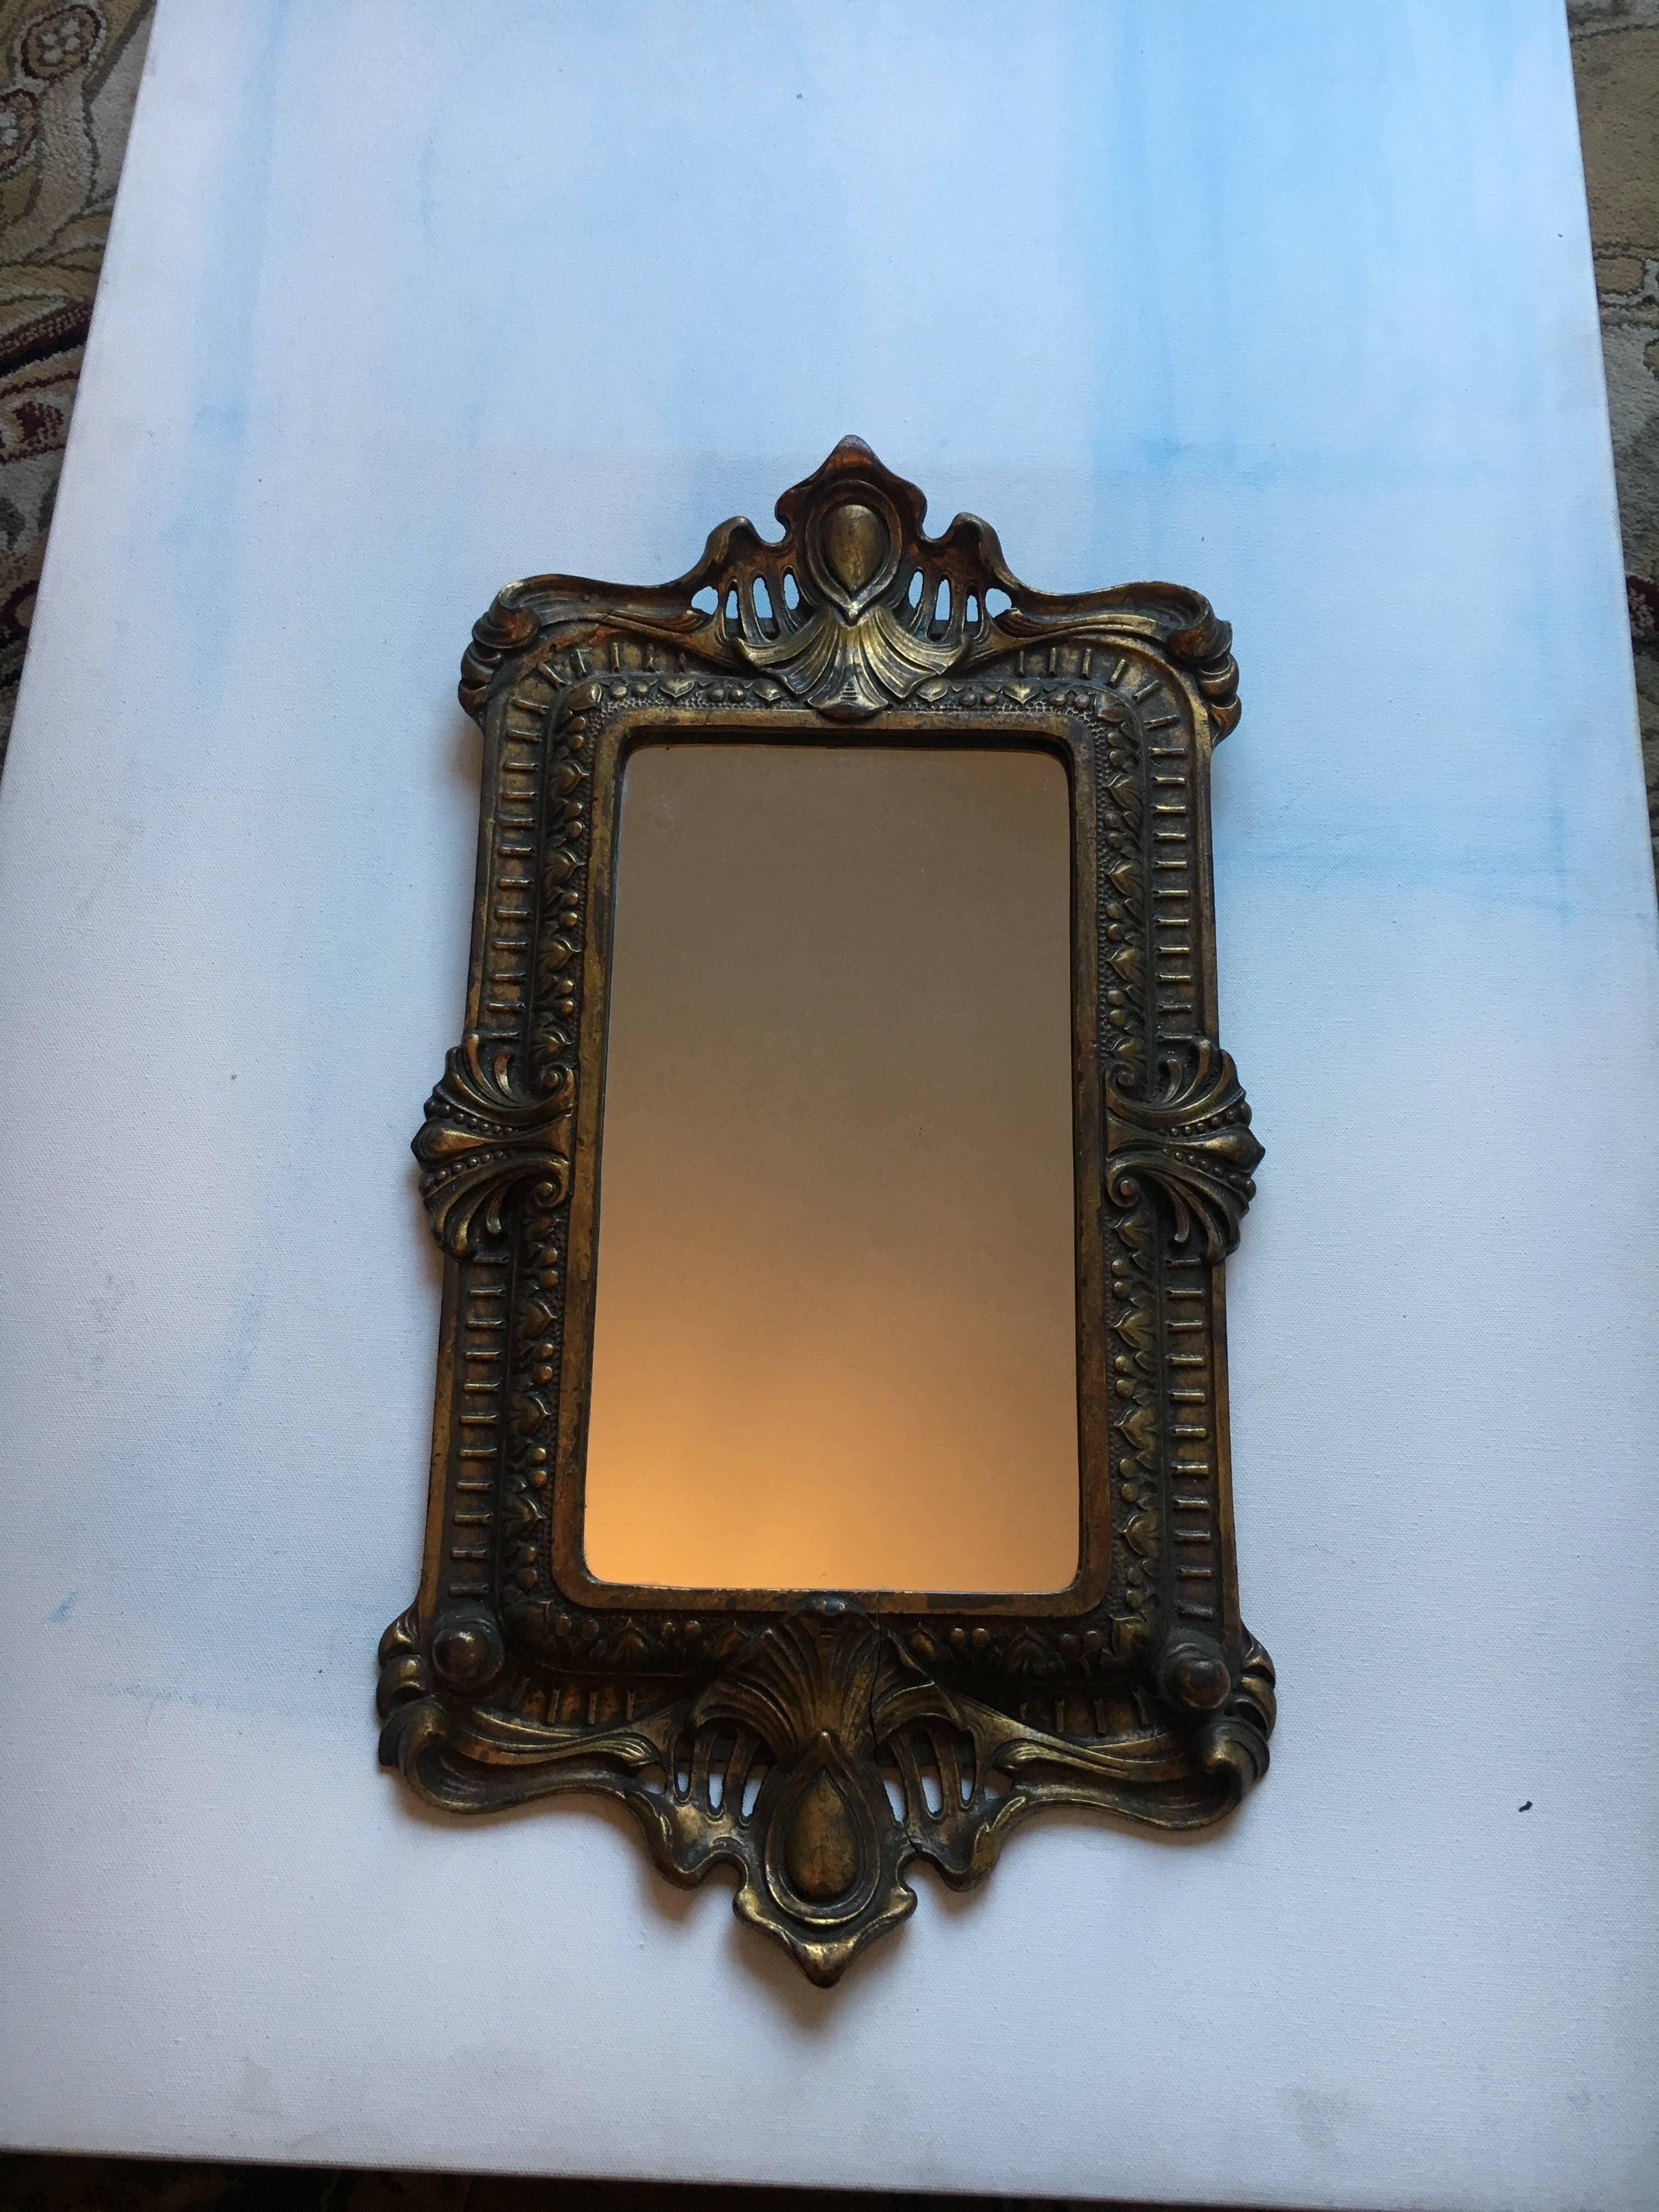 Ornate bronze mirror tray, this piece can be hung for decorative purposes or used flat as a tray. Great patinated look and beautiful design.
The mirror has a crack that is undetectable, and hard to spot, see images.